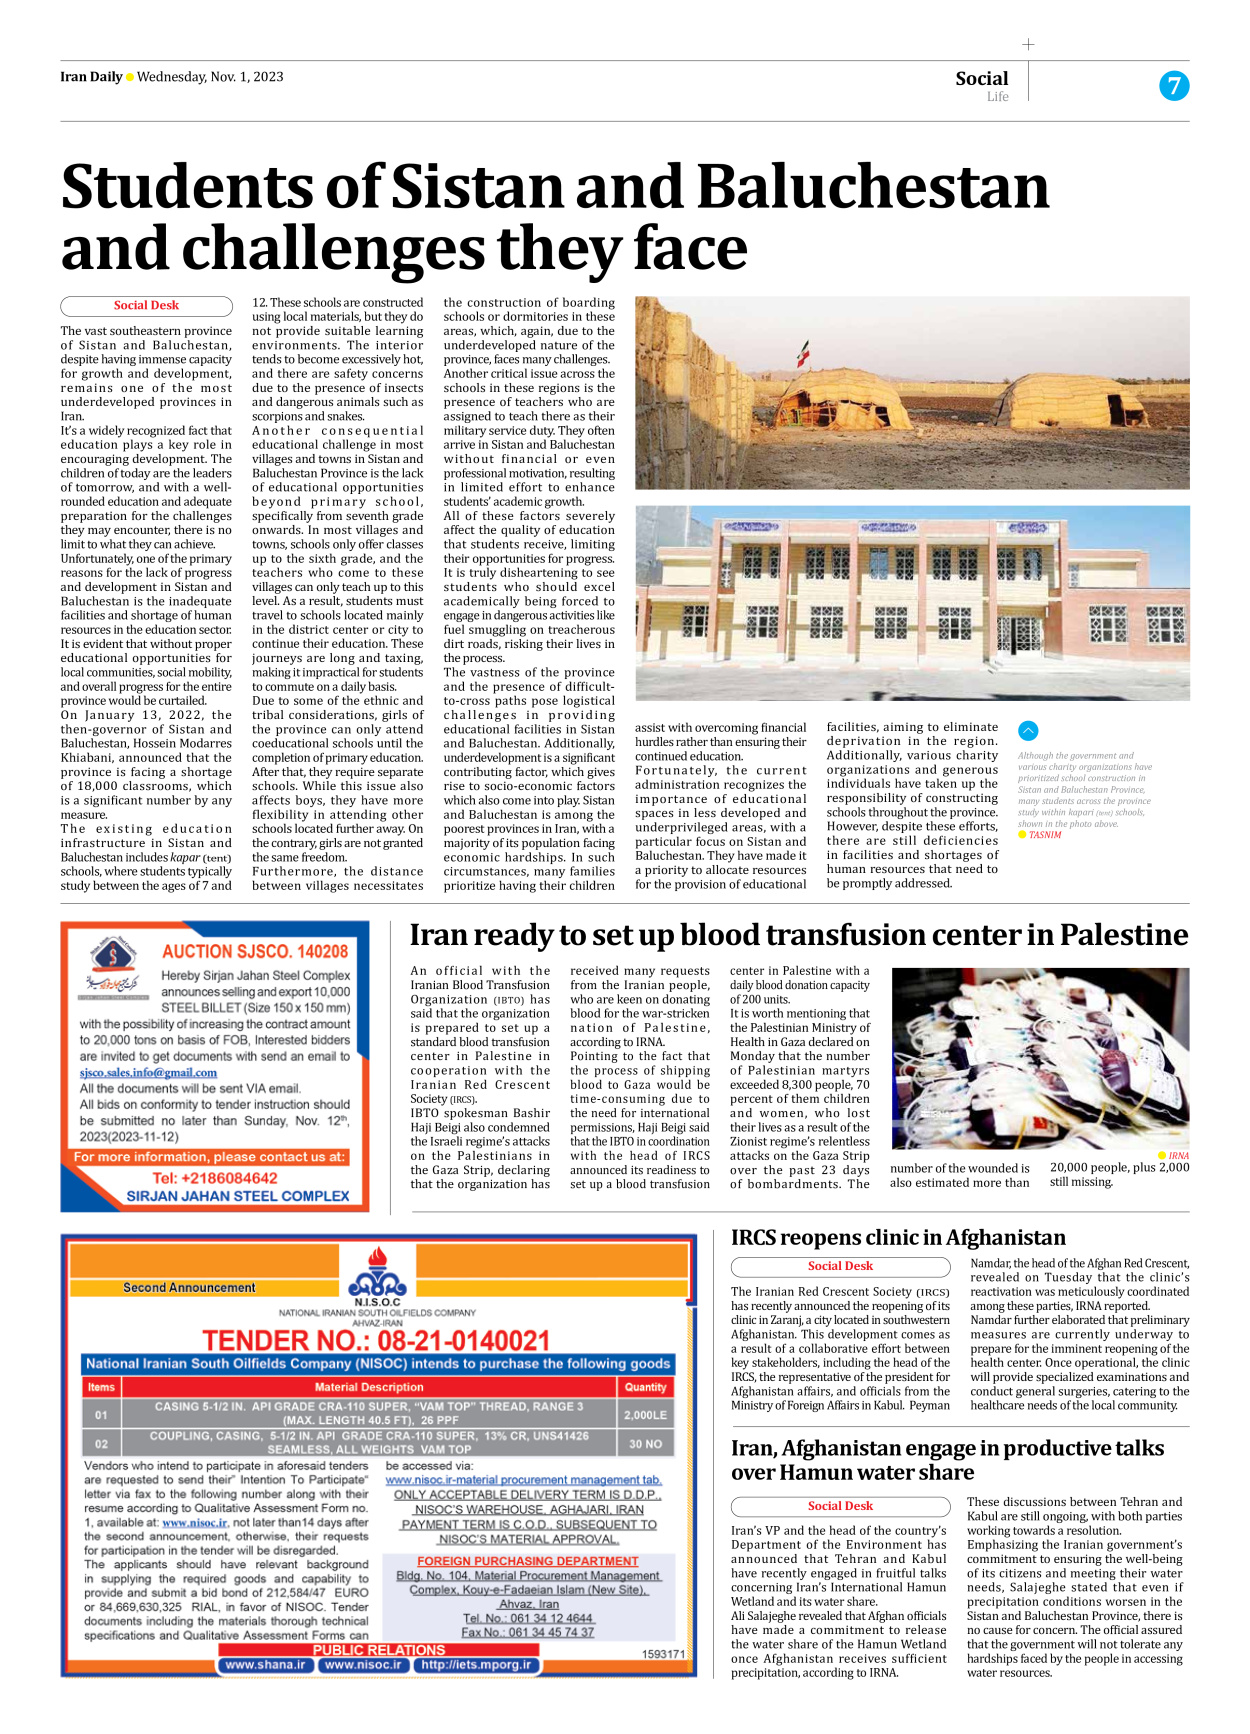 Iran Daily - Number Seven Thousand Four Hundred and Twenty Three - 01 November 2023 - Page 7